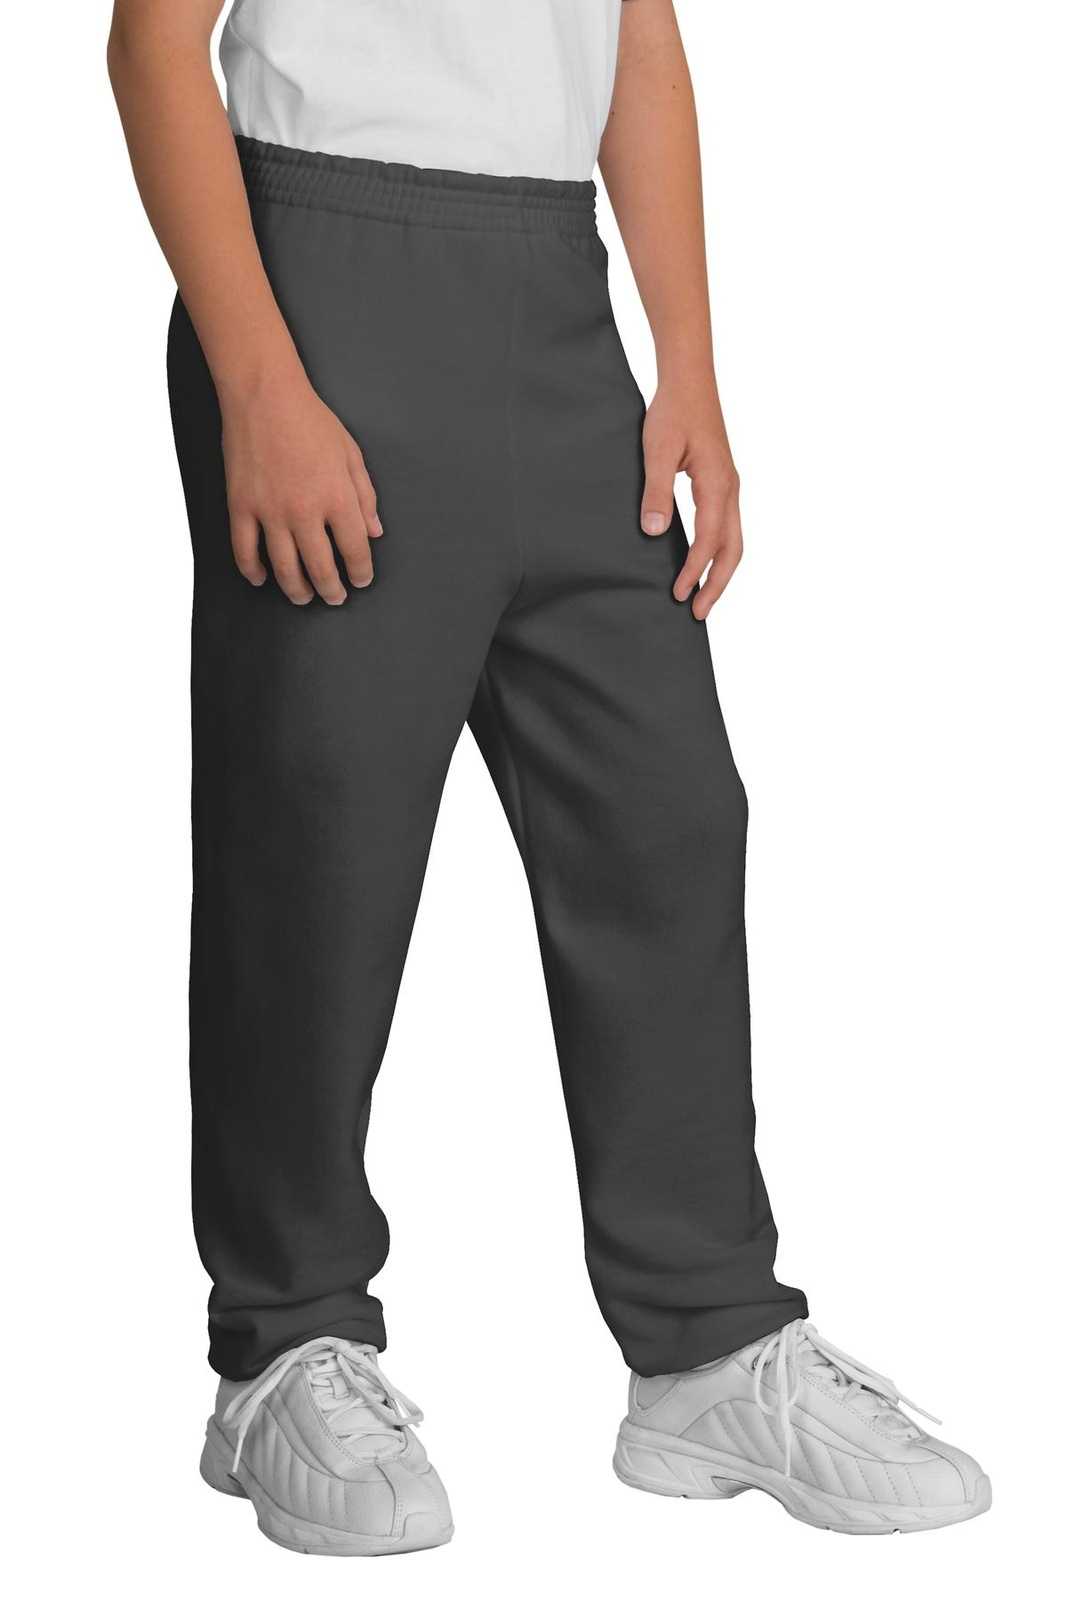 Port & Company PC90YP Youth Core Fleece Sweatpant - Charcoal - HIT a Double - 1